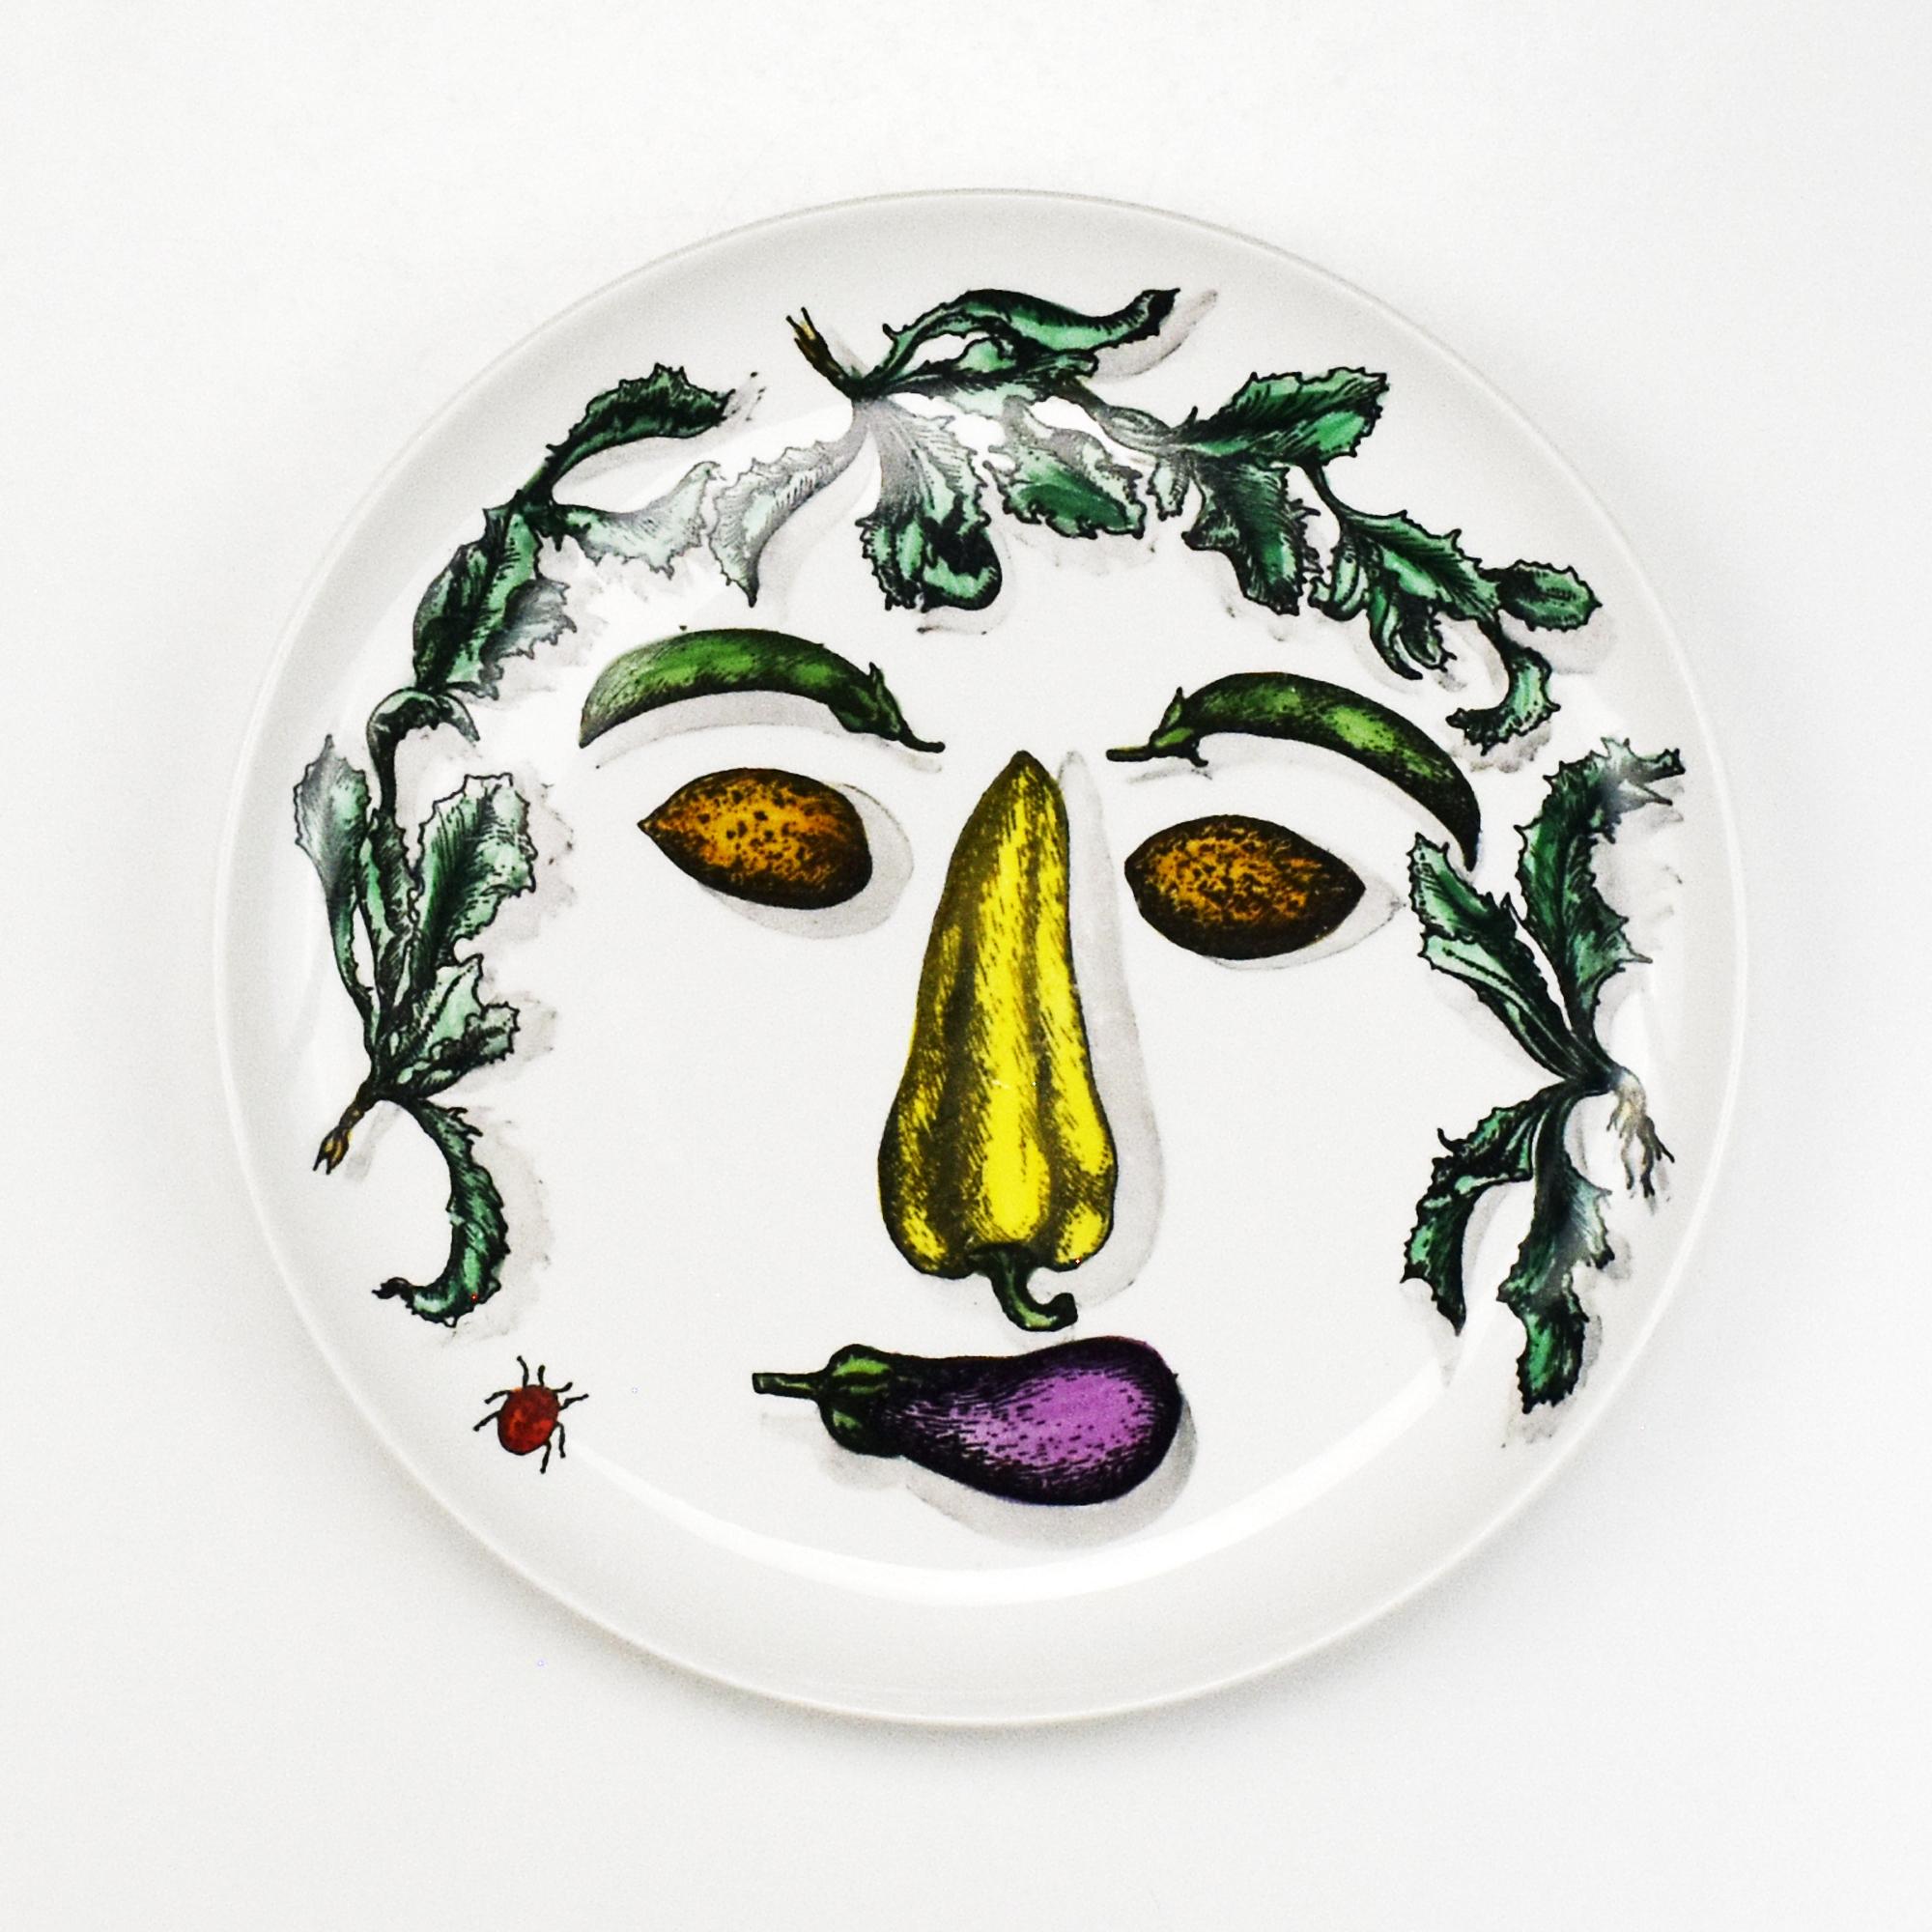 A vintage set of four plates by Piero Fornasetti from the 